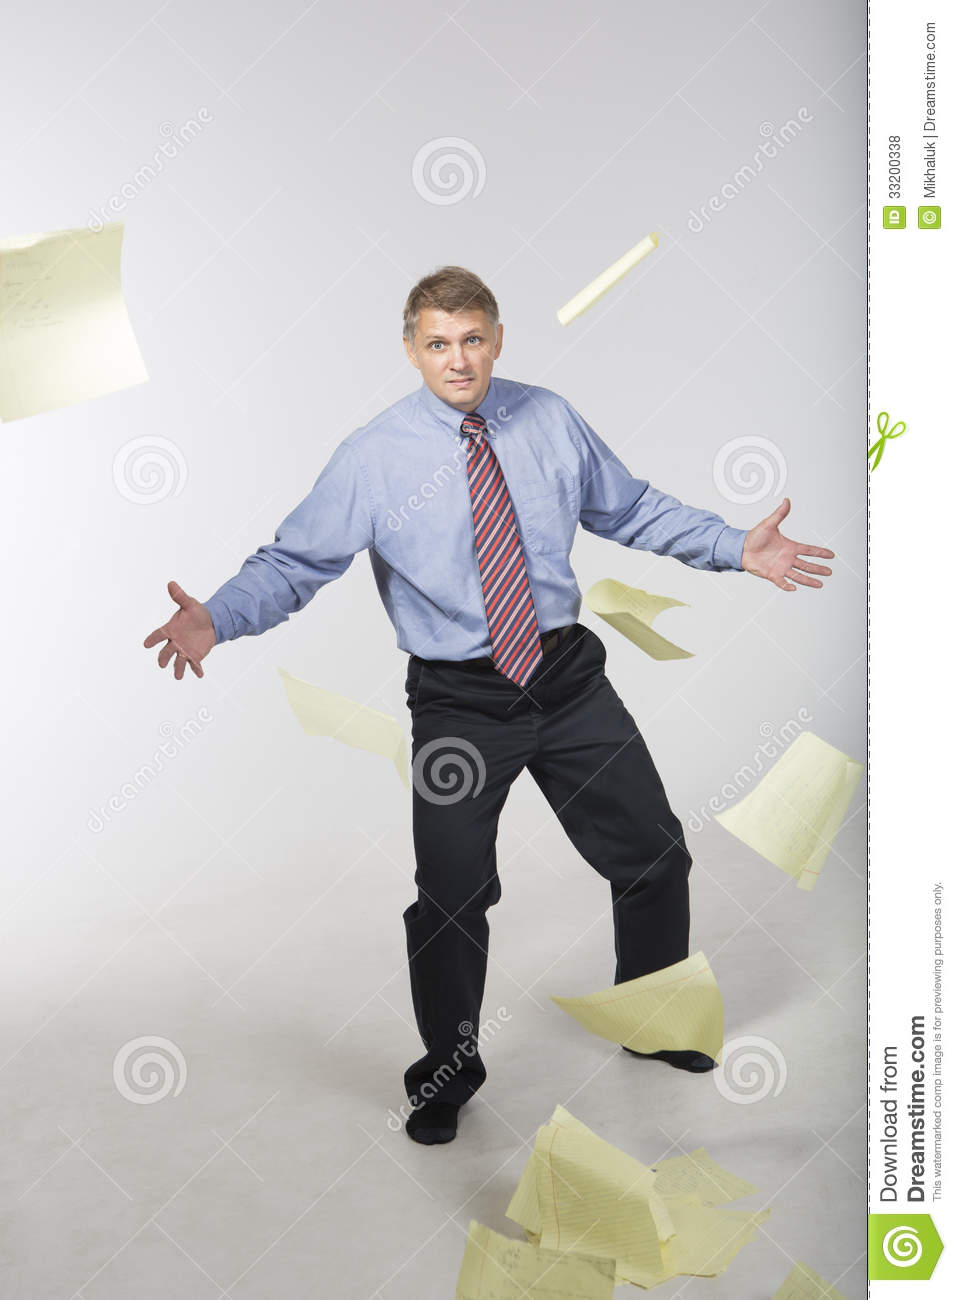 Frustration And Anger Royalty Free Stock Photos   Image  33200338